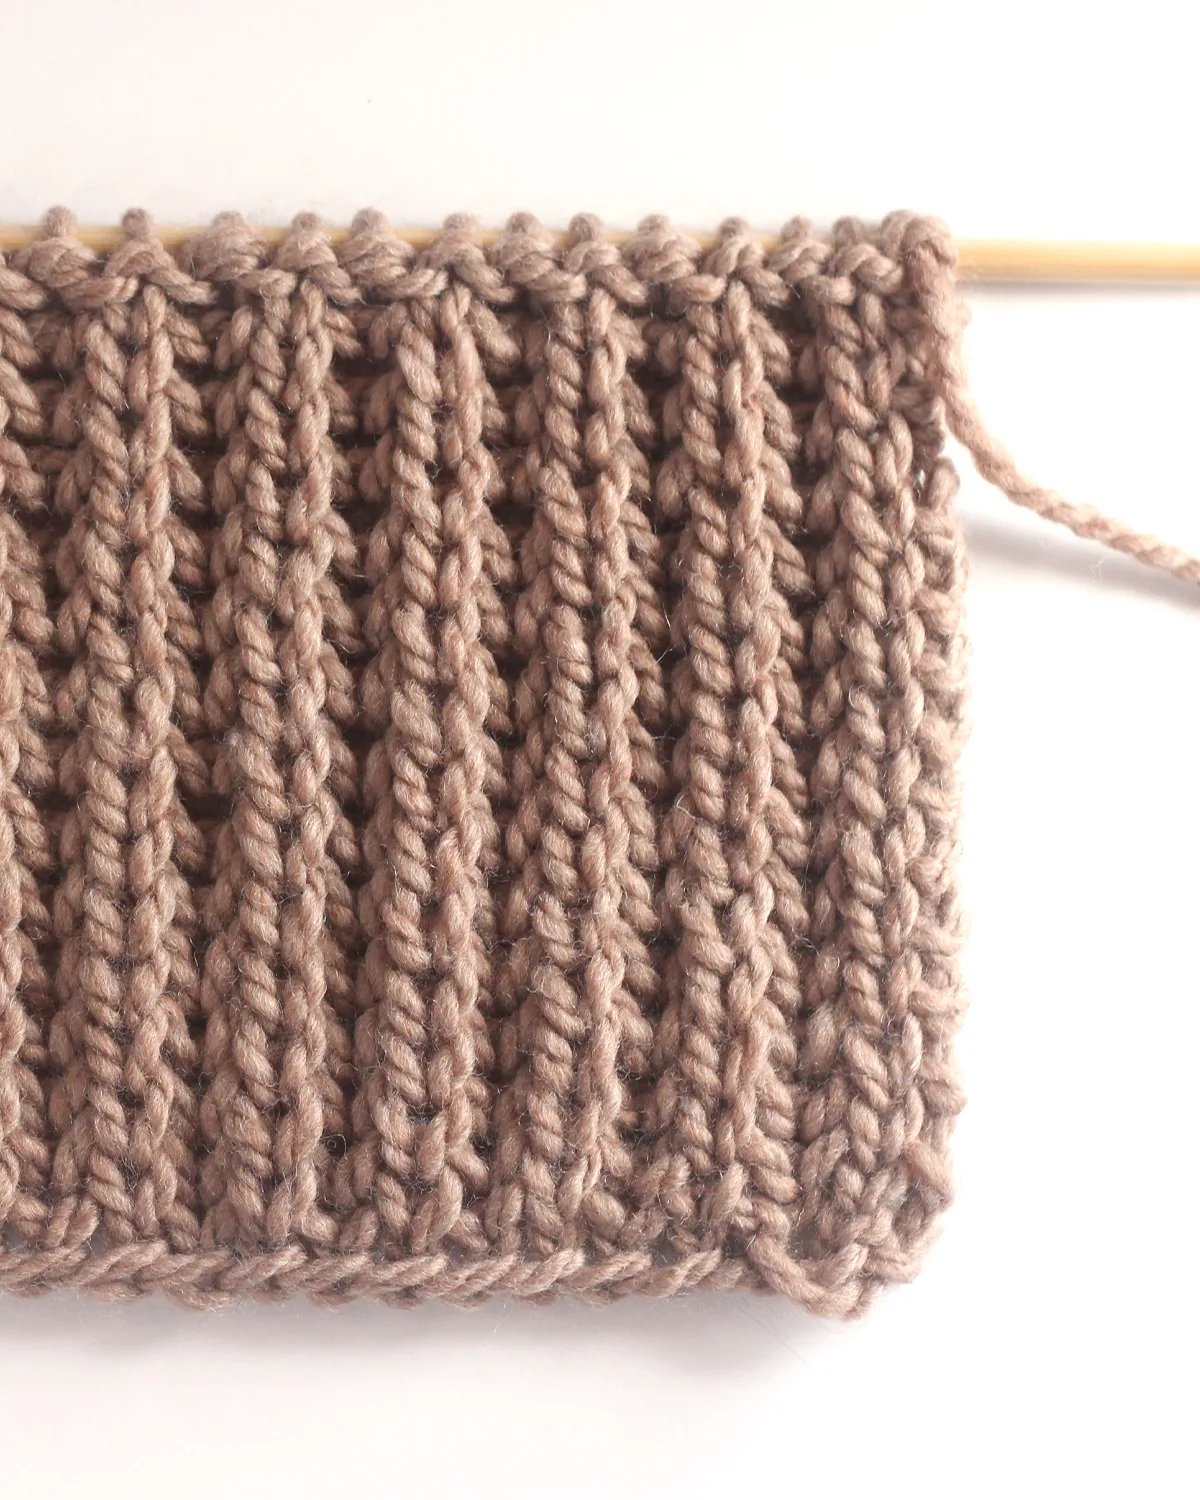 Fisherman's Rib knit stitch pattern in brown yarn color on a wooden bamboo knitting needle by Studio Knit.